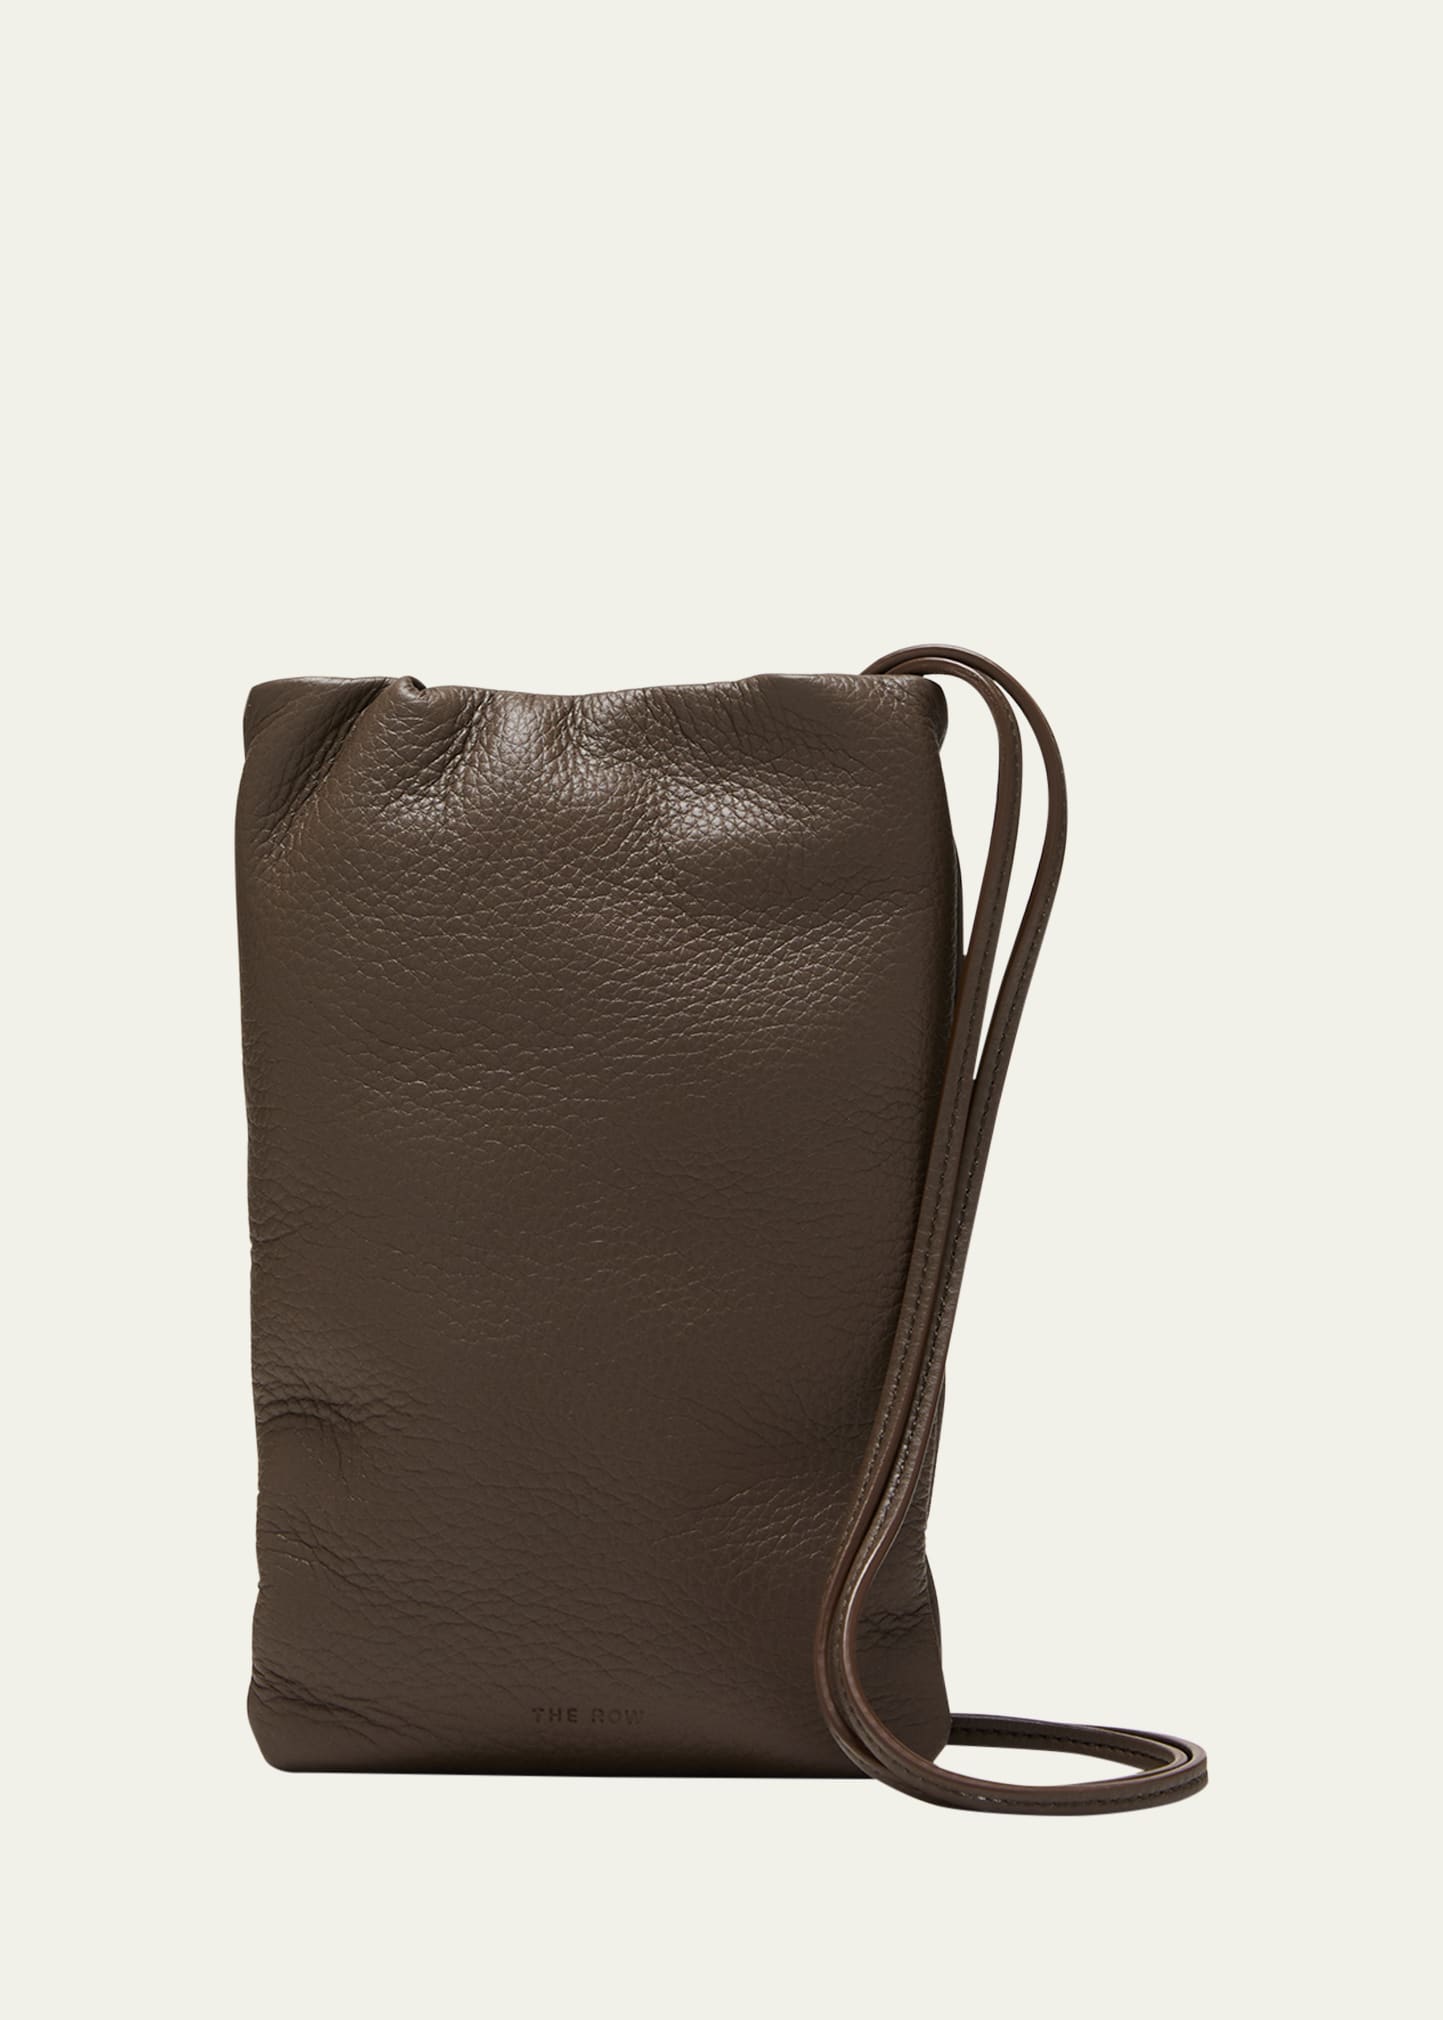 THE ROW BOURSE PHONE CASE IN GRAIN LEATHER